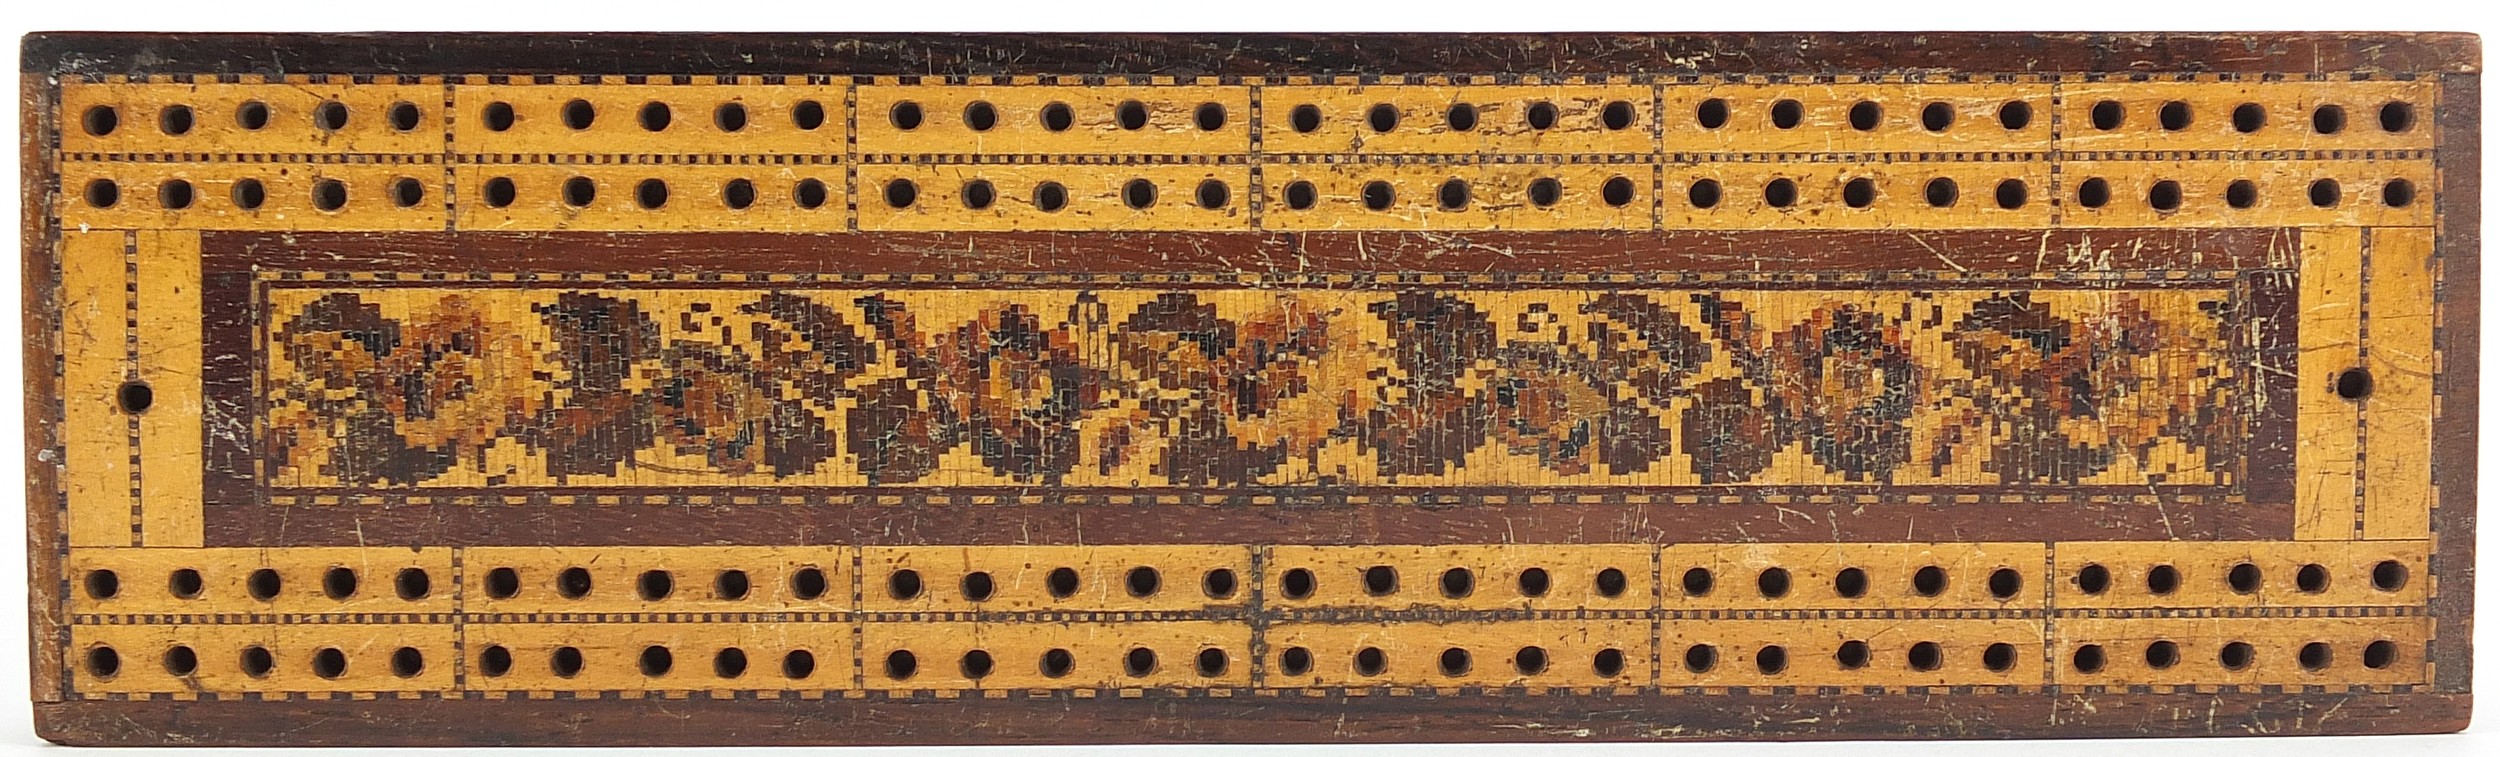 Victorian Tunbridge Ware cribbage board with floral inlay, 25cm x 7cm - Image 2 of 4